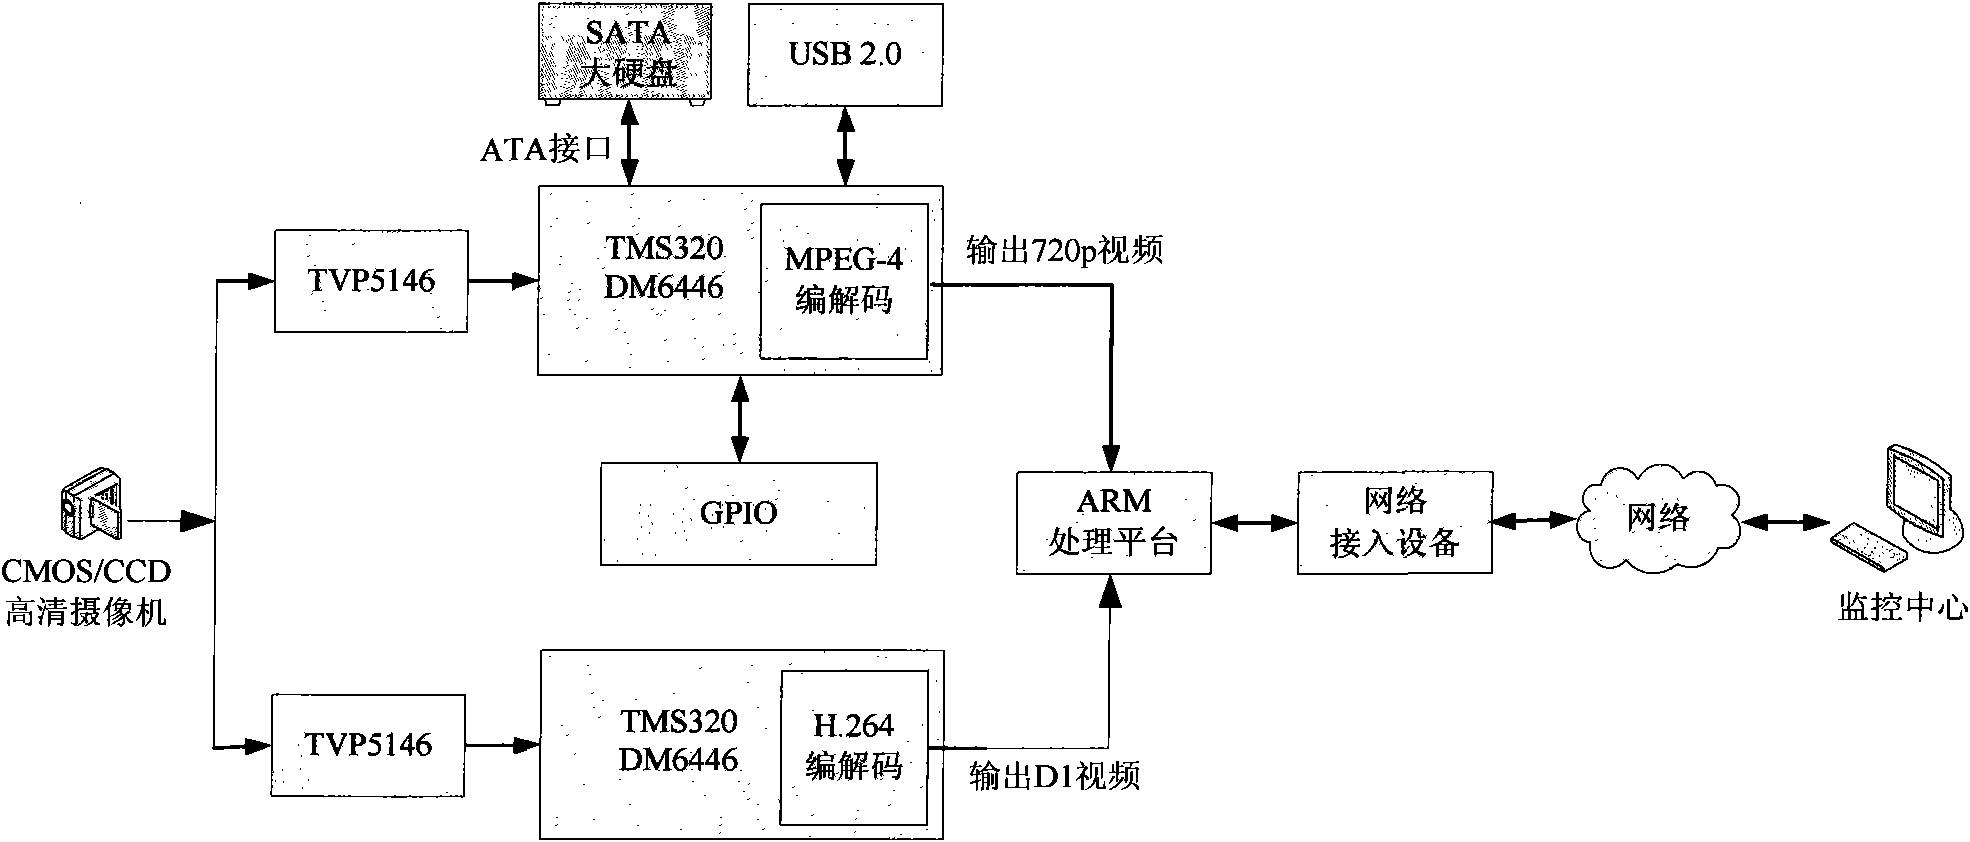 Network video monitoring system based on resolution ratio grading transmission